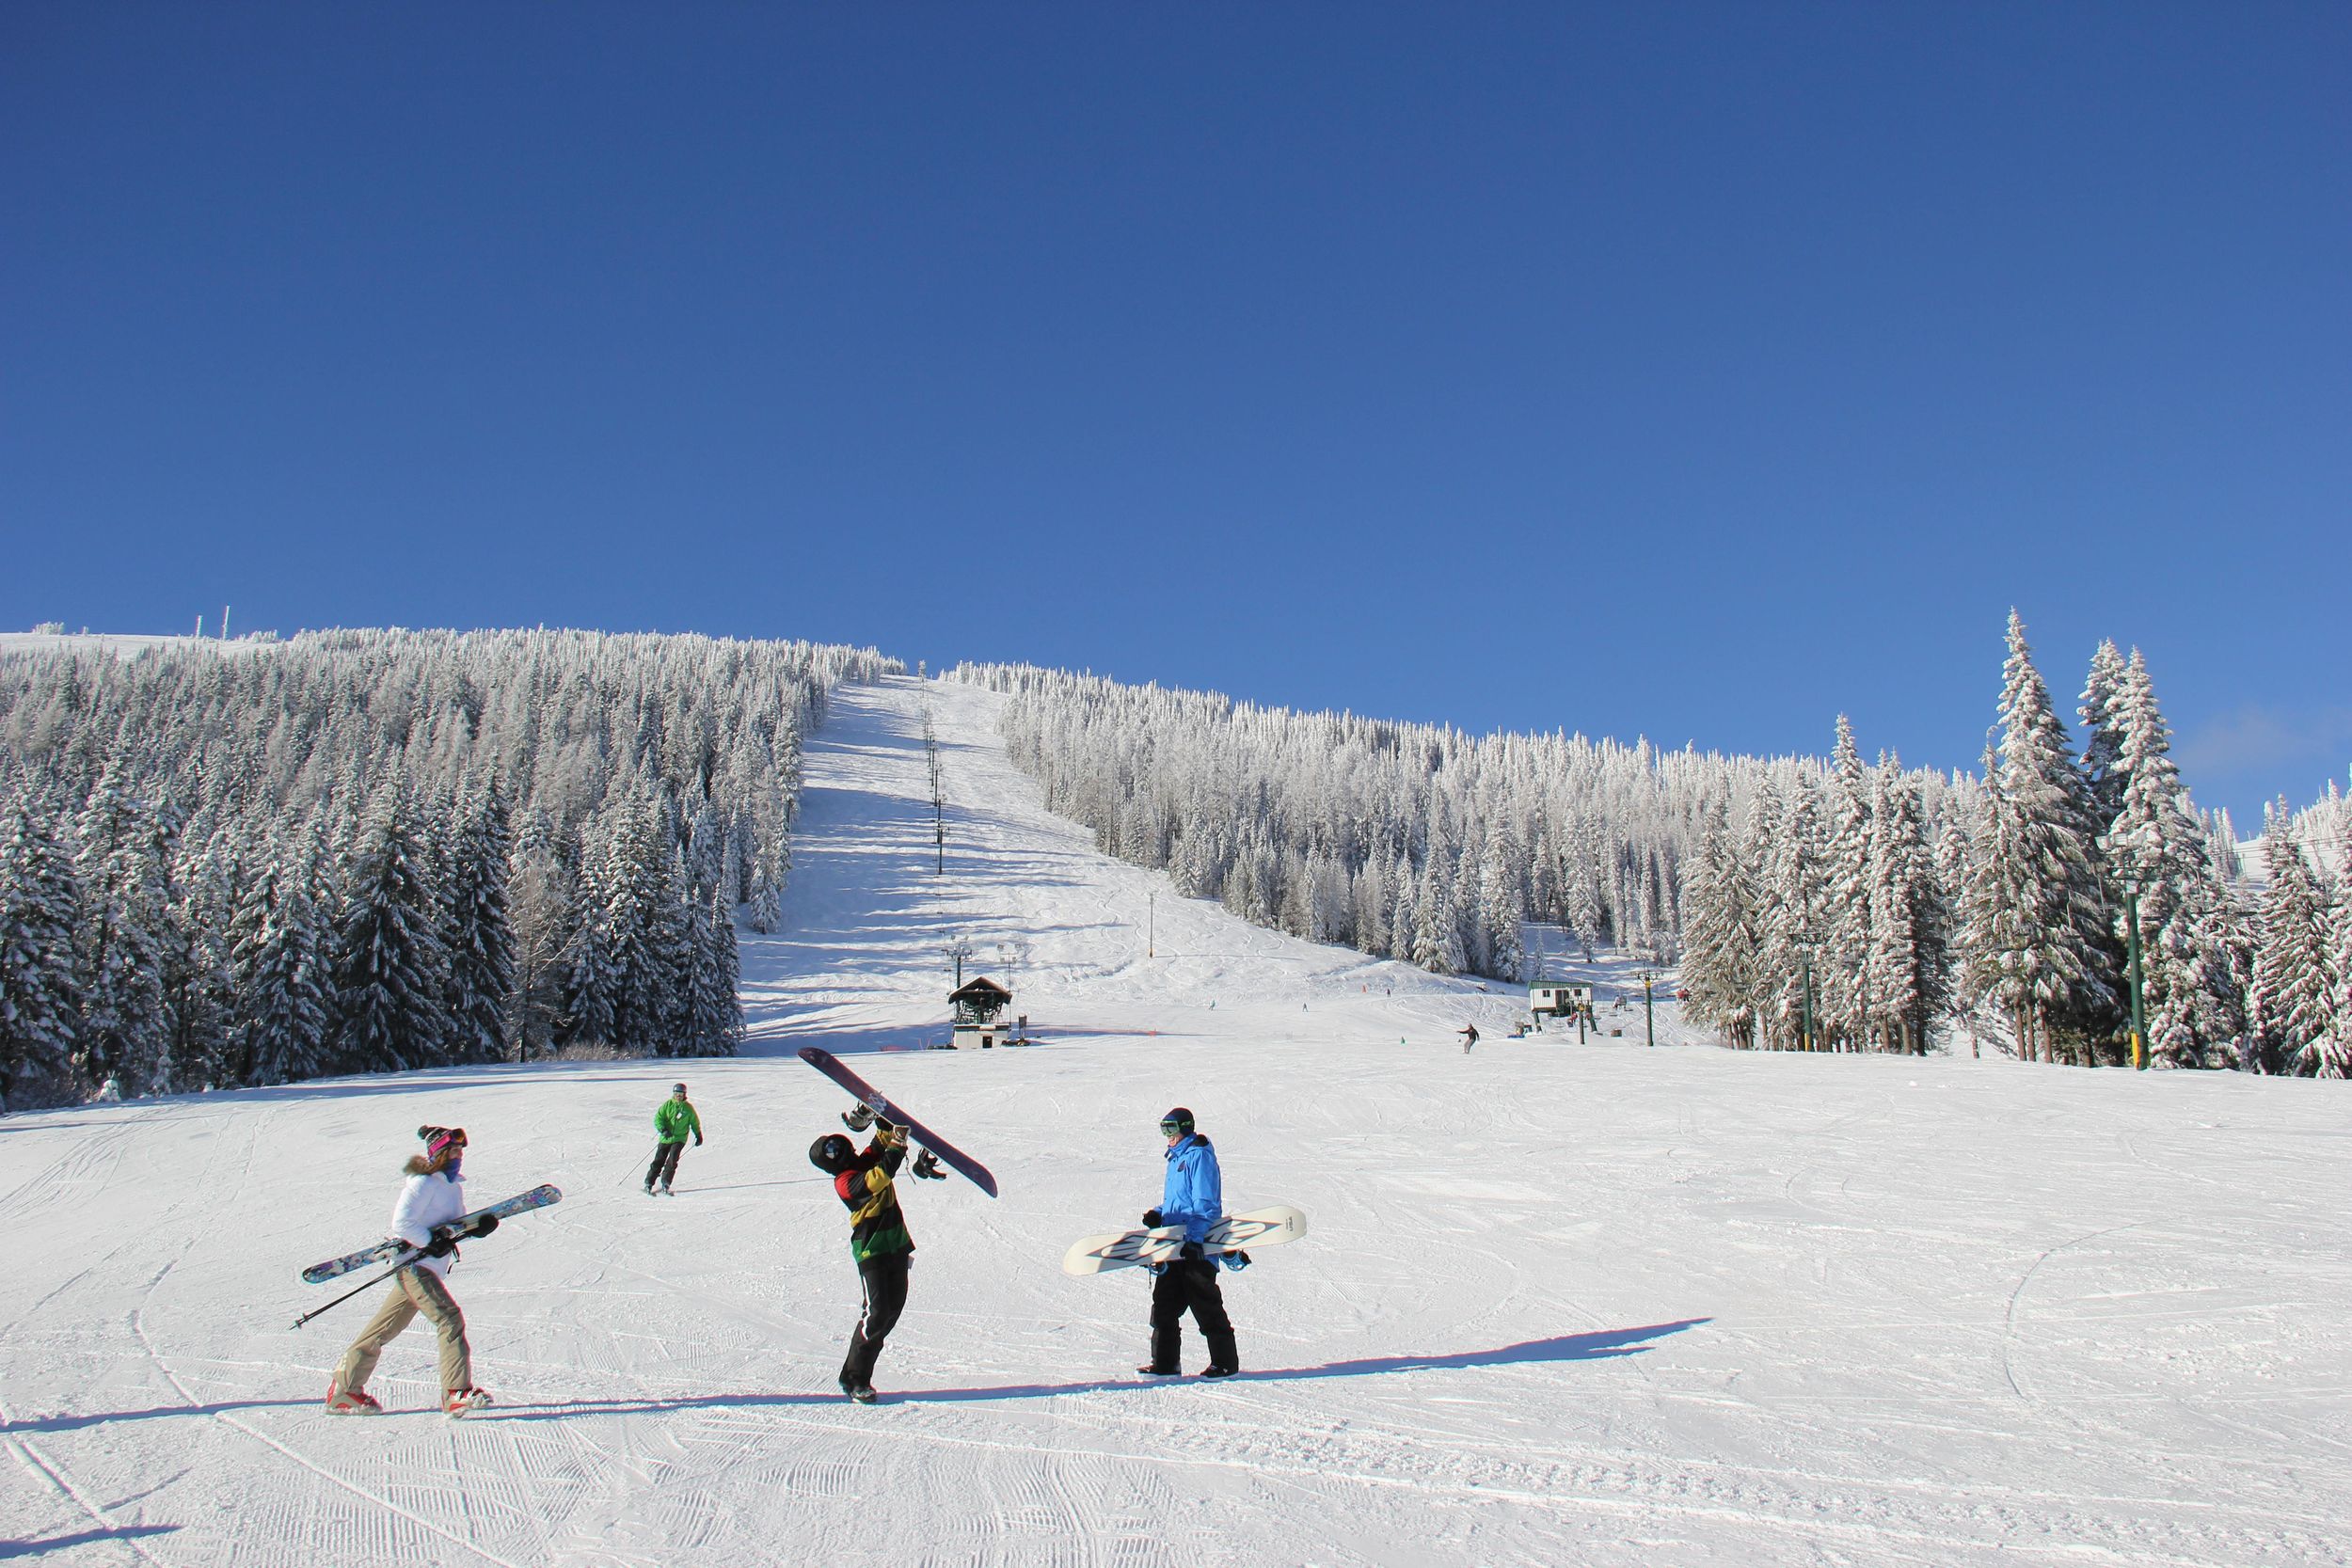 Mount Spokane hour change making it harder for morning skiers The